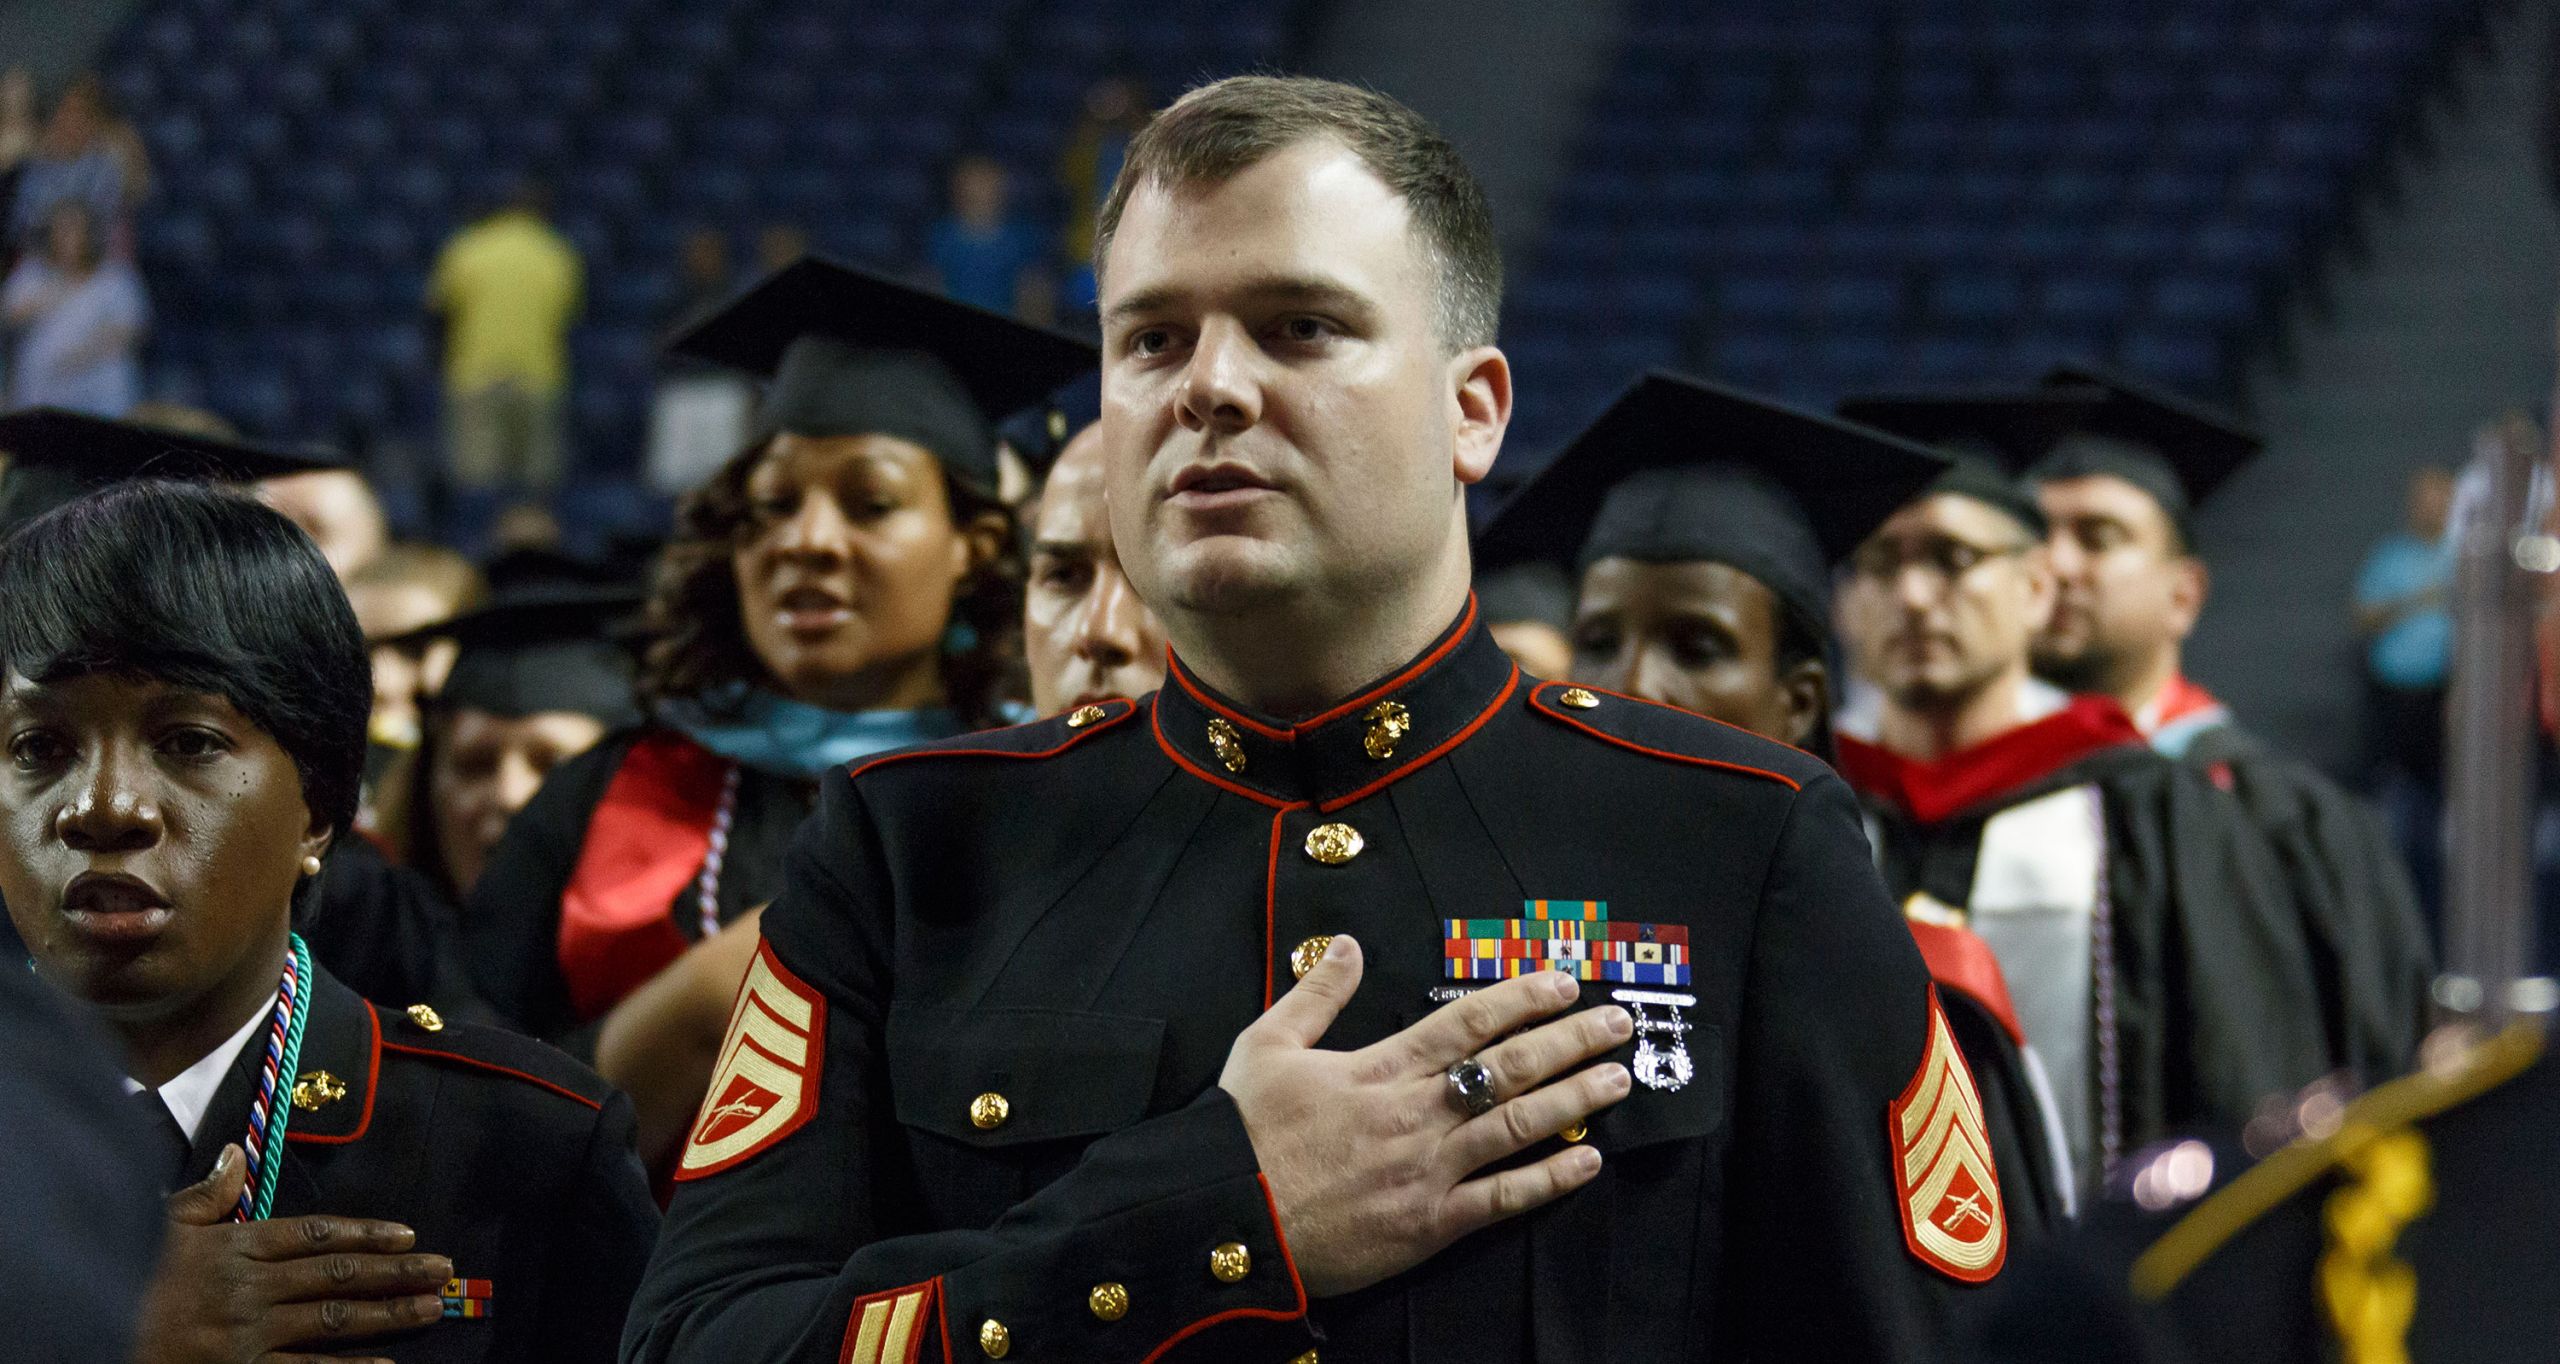 Out of the over 17,800 graduates honored at Liberty University’s 41st Commencement, 5,185 — nearly 30 percent — were active, reserve, or retired military.